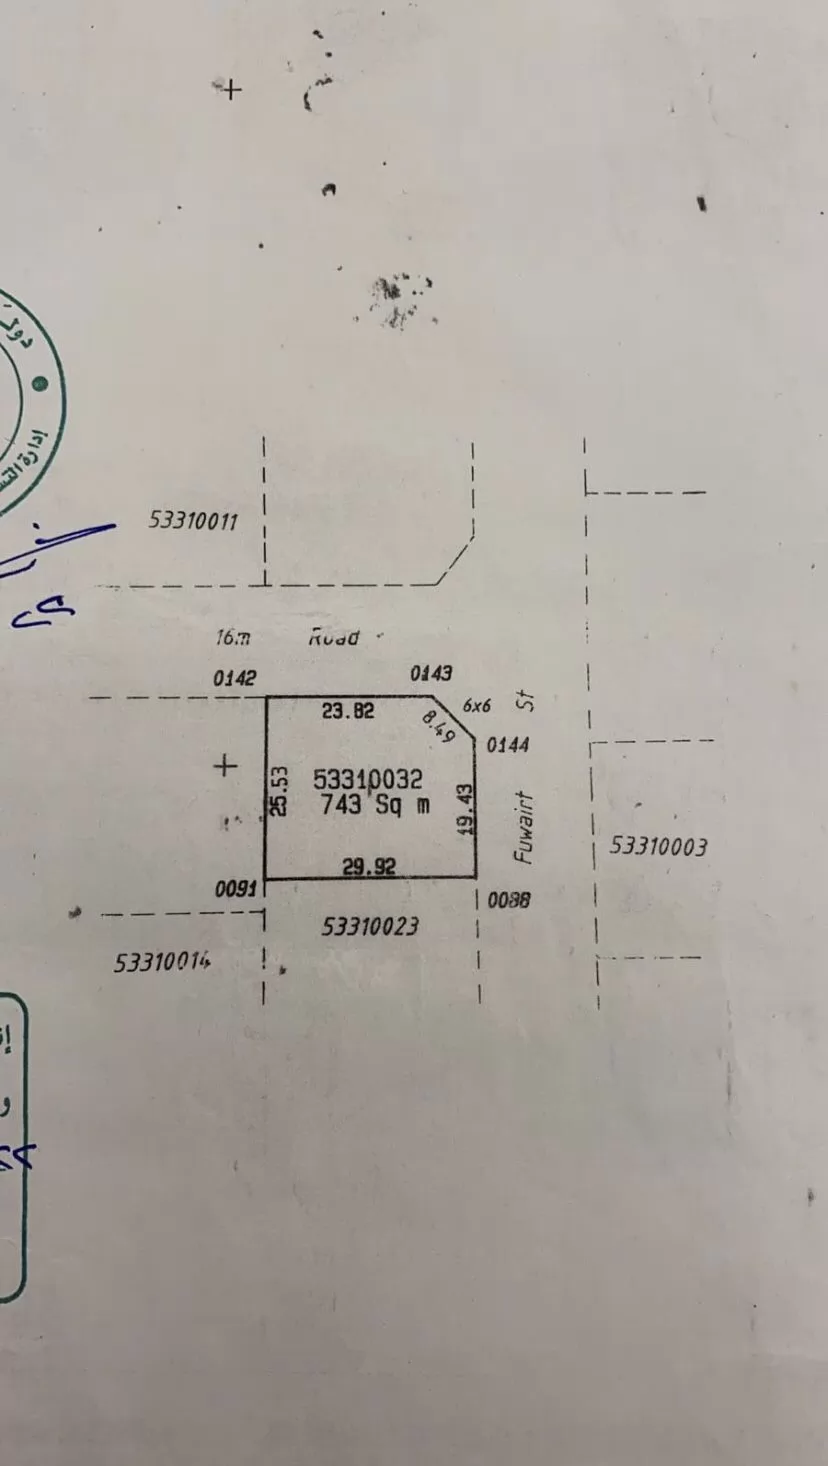 Land Ready Property Mixed Use Land  for sale in Doha-Qatar #19203 - 1  image 